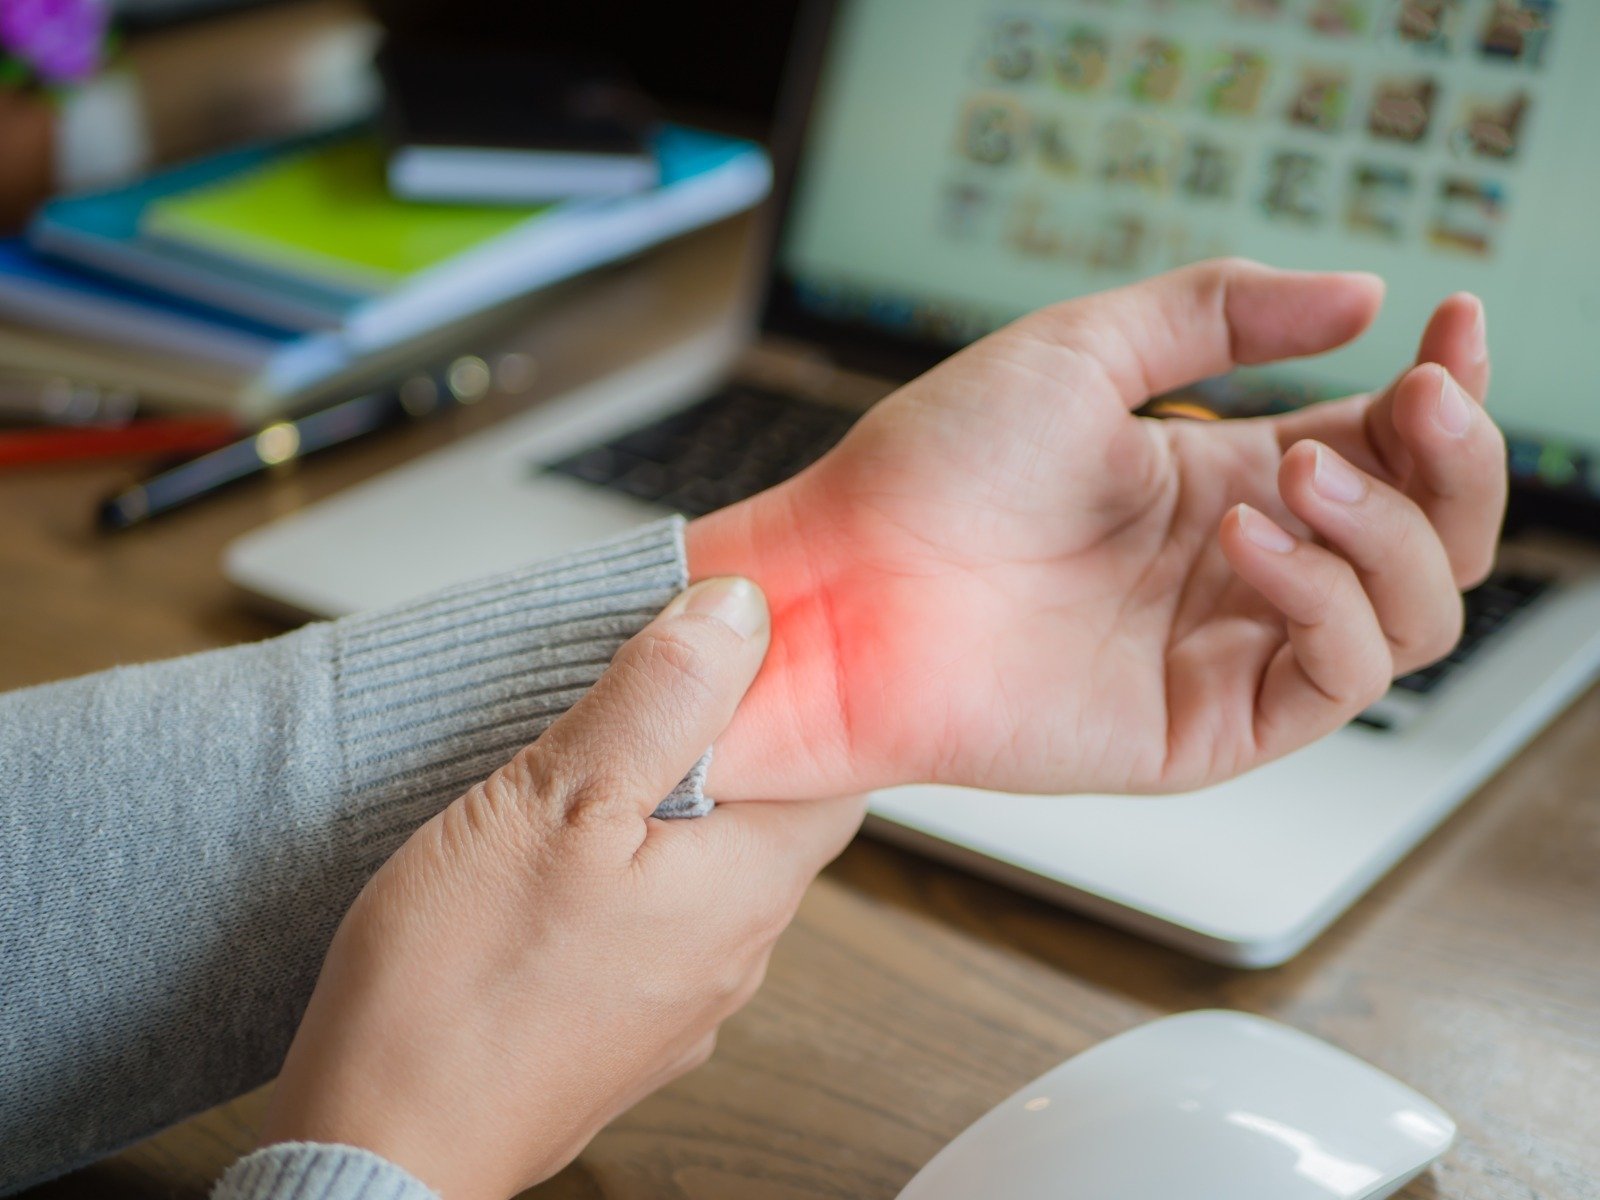 How Can Physiotherapy Treatment For Work Injuries Help Heal Carpal Tunnel Syndrome?